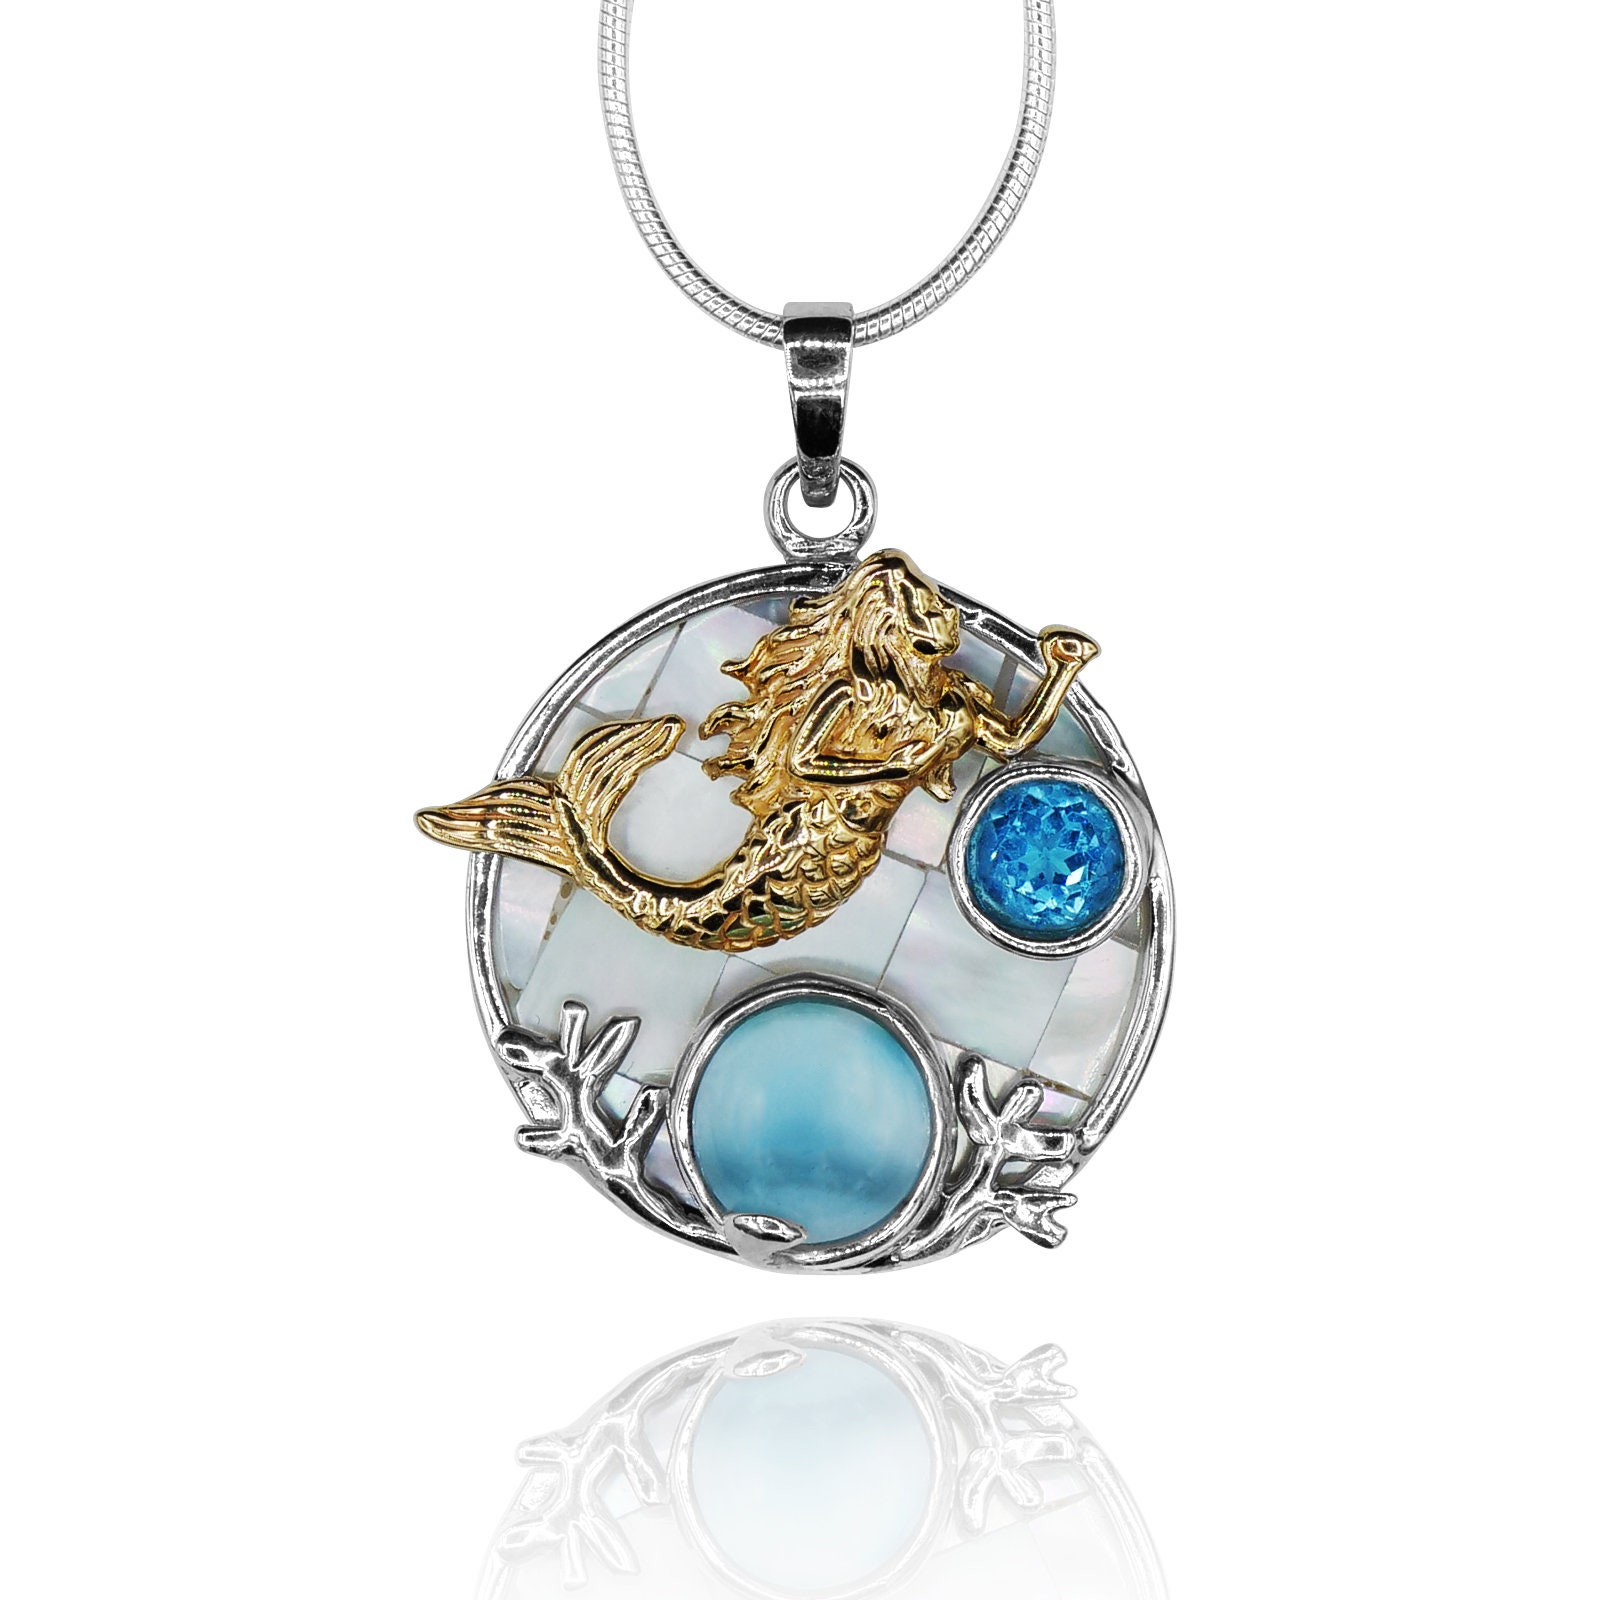 Round Mermaid Necklace Sterling Silver Pendant With Larimar , Blue Topaz  and Mother of Pearl style Sea Life Jewelry Nautical Themed 